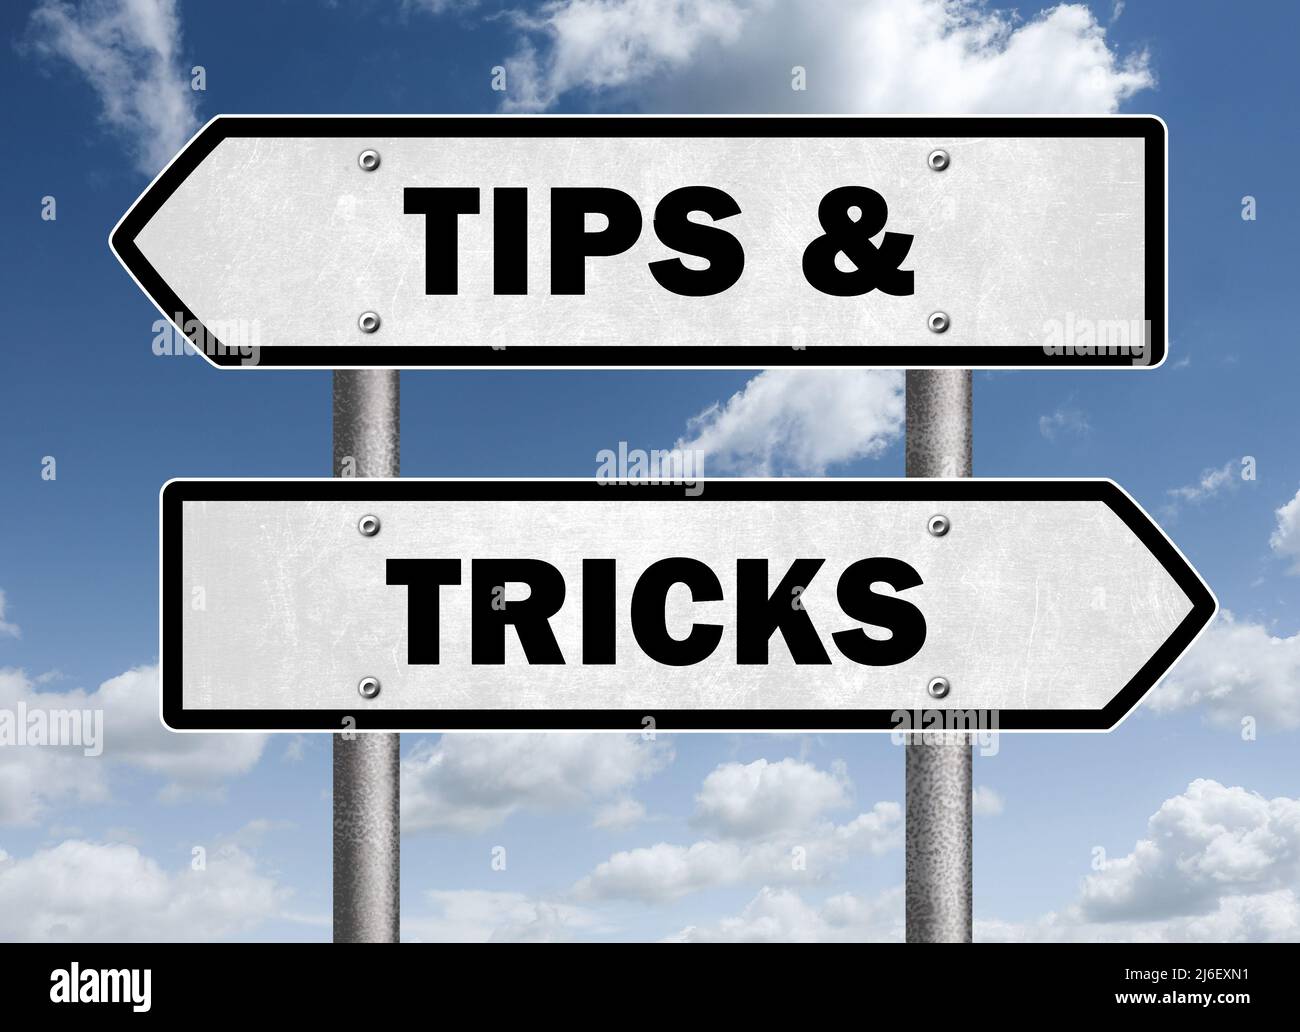 Tips and Tricks Stock Photo